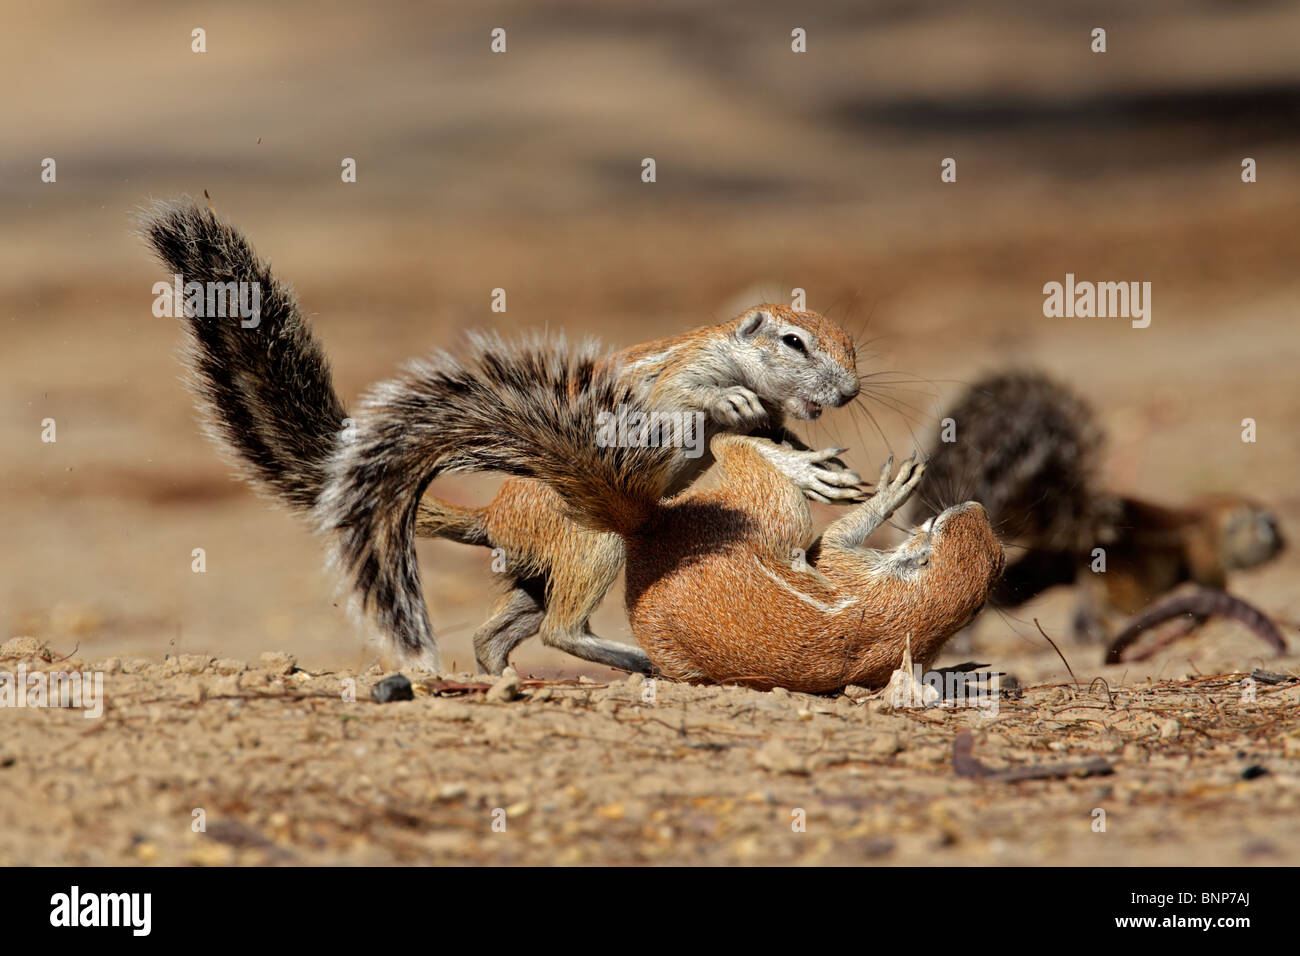 Two young, playful ground squirrels (Xerus inaurus), Kgalagadi Transfrontier Park, South Africa Stock Photo